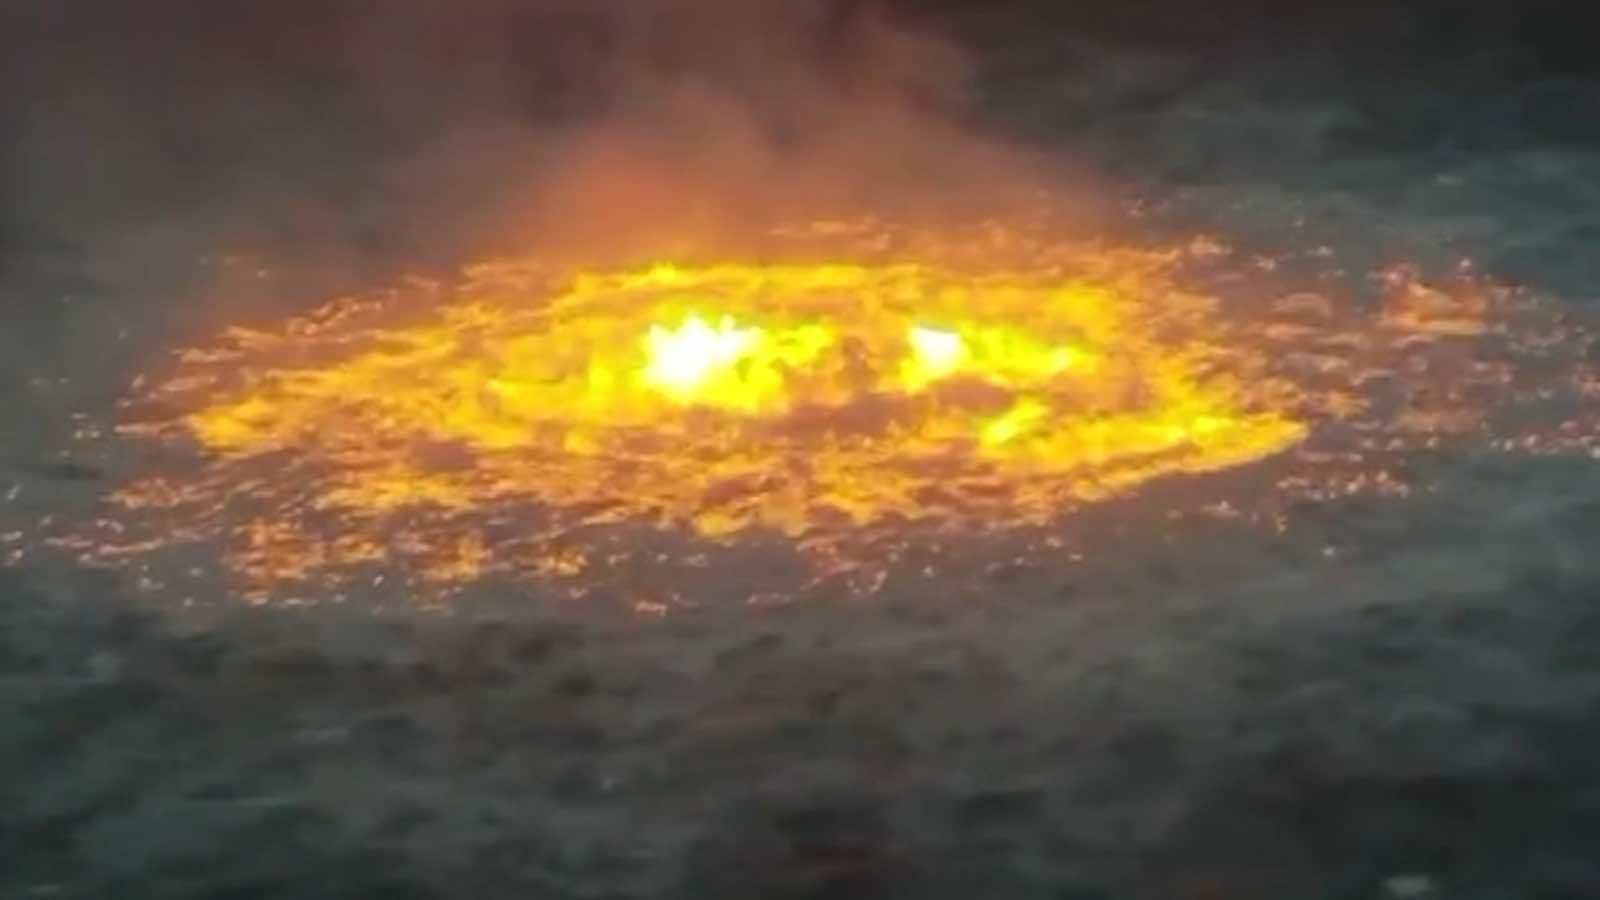 WATCH The Ocean Was On Fire At The Gulf Of Mexico After Pip